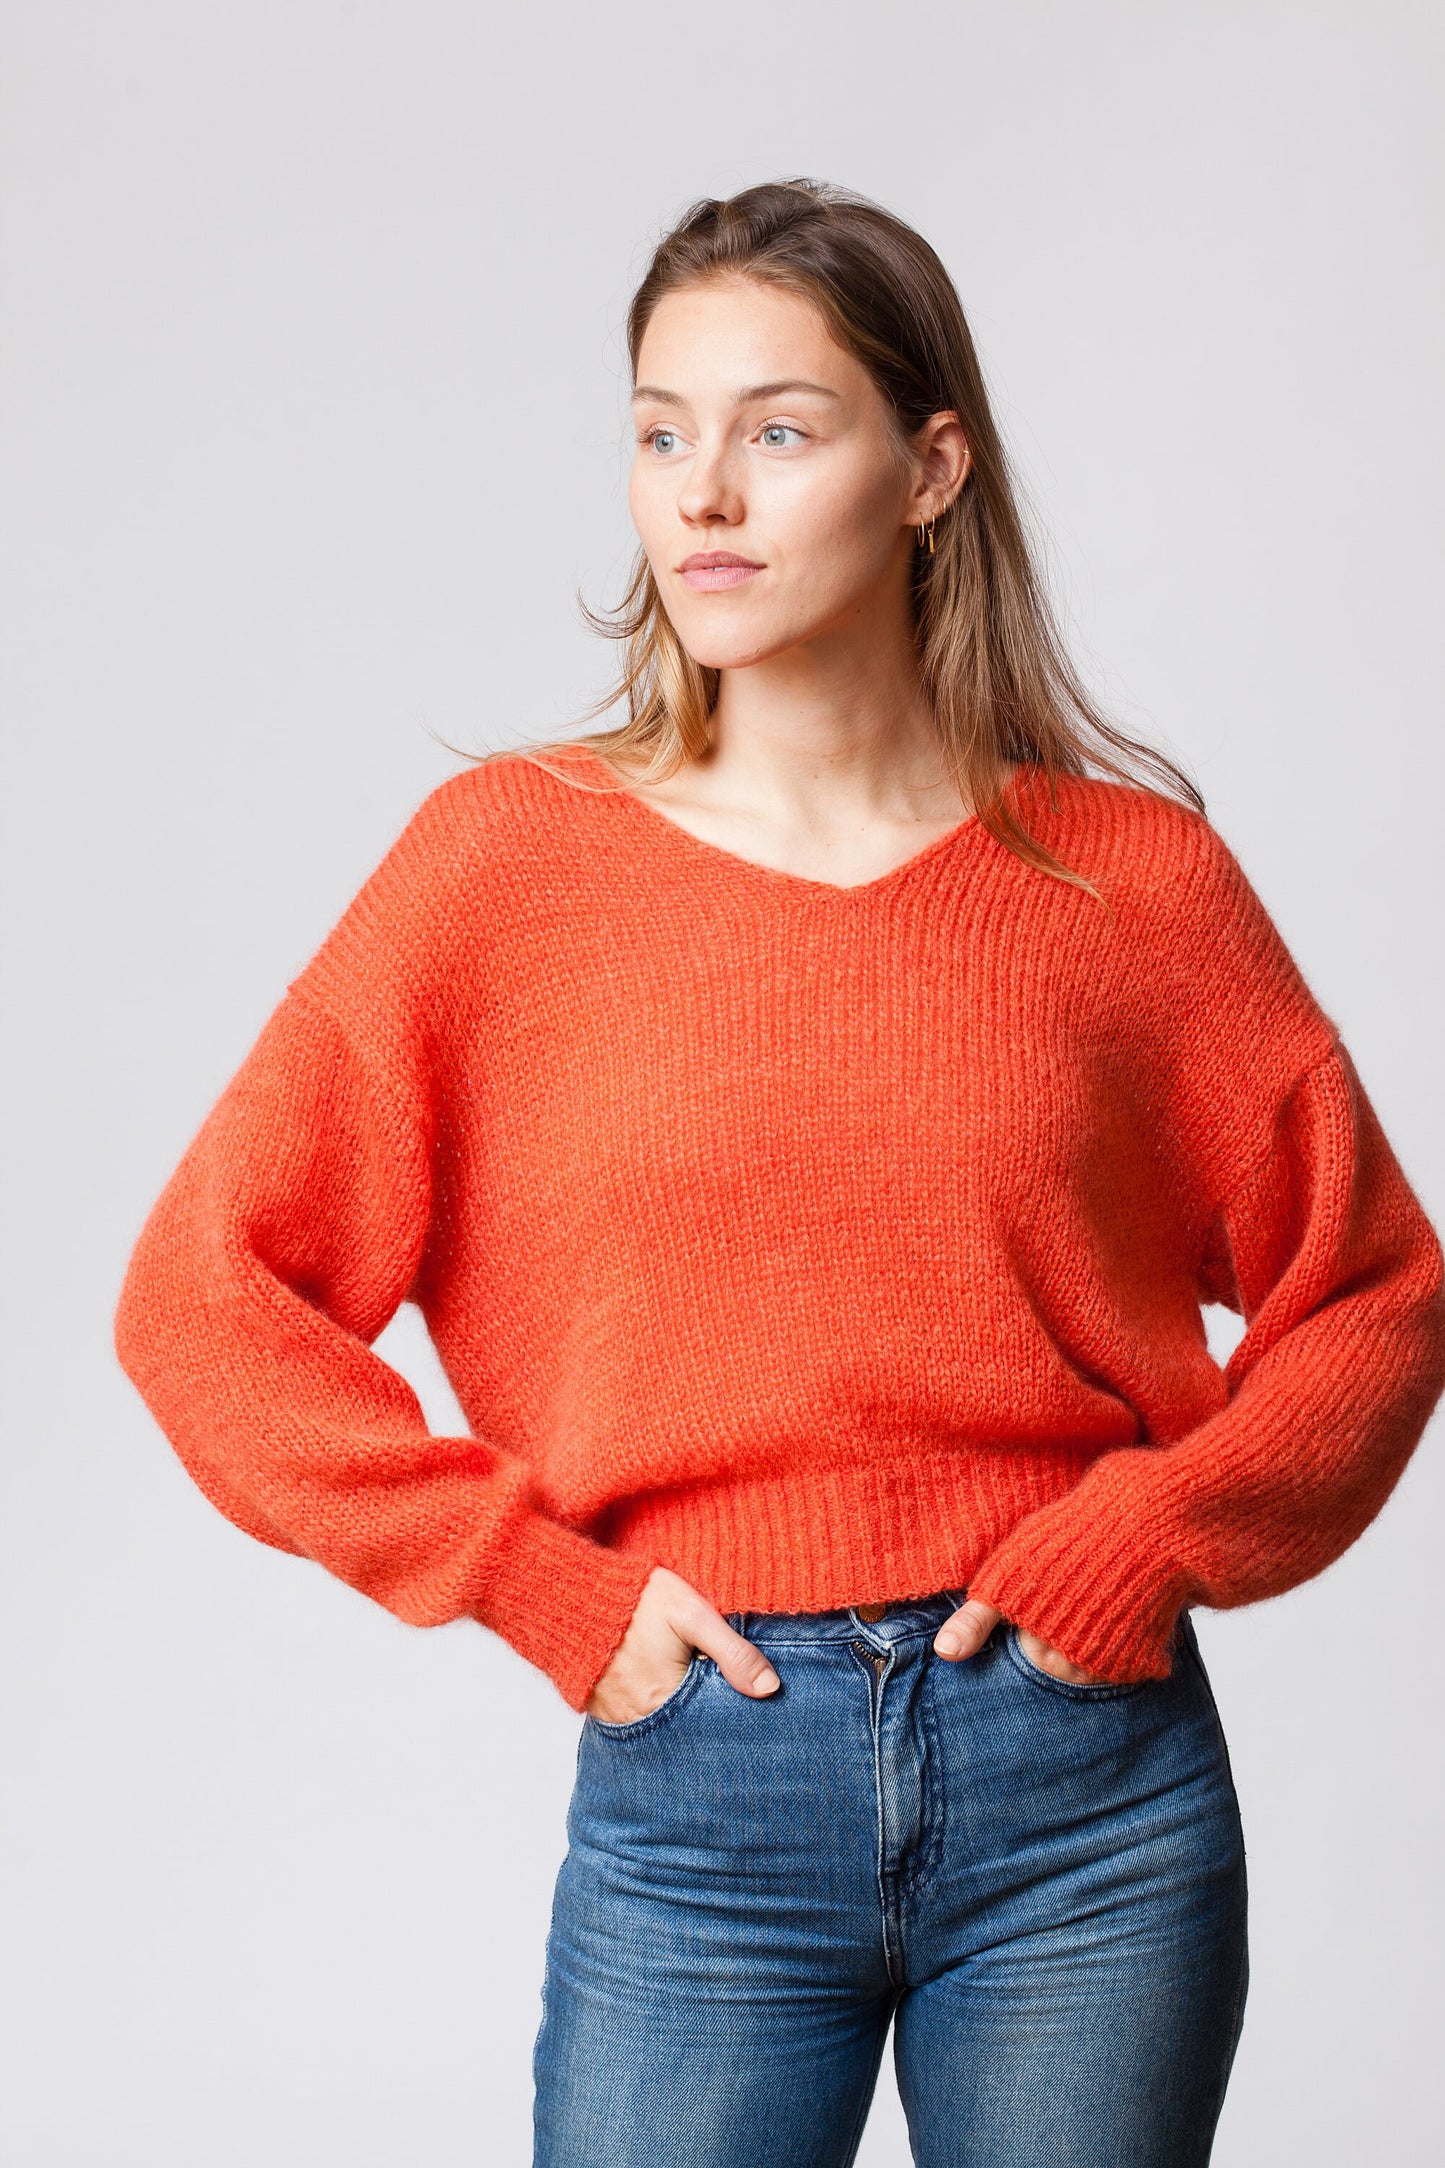 Pullover mit Mohair